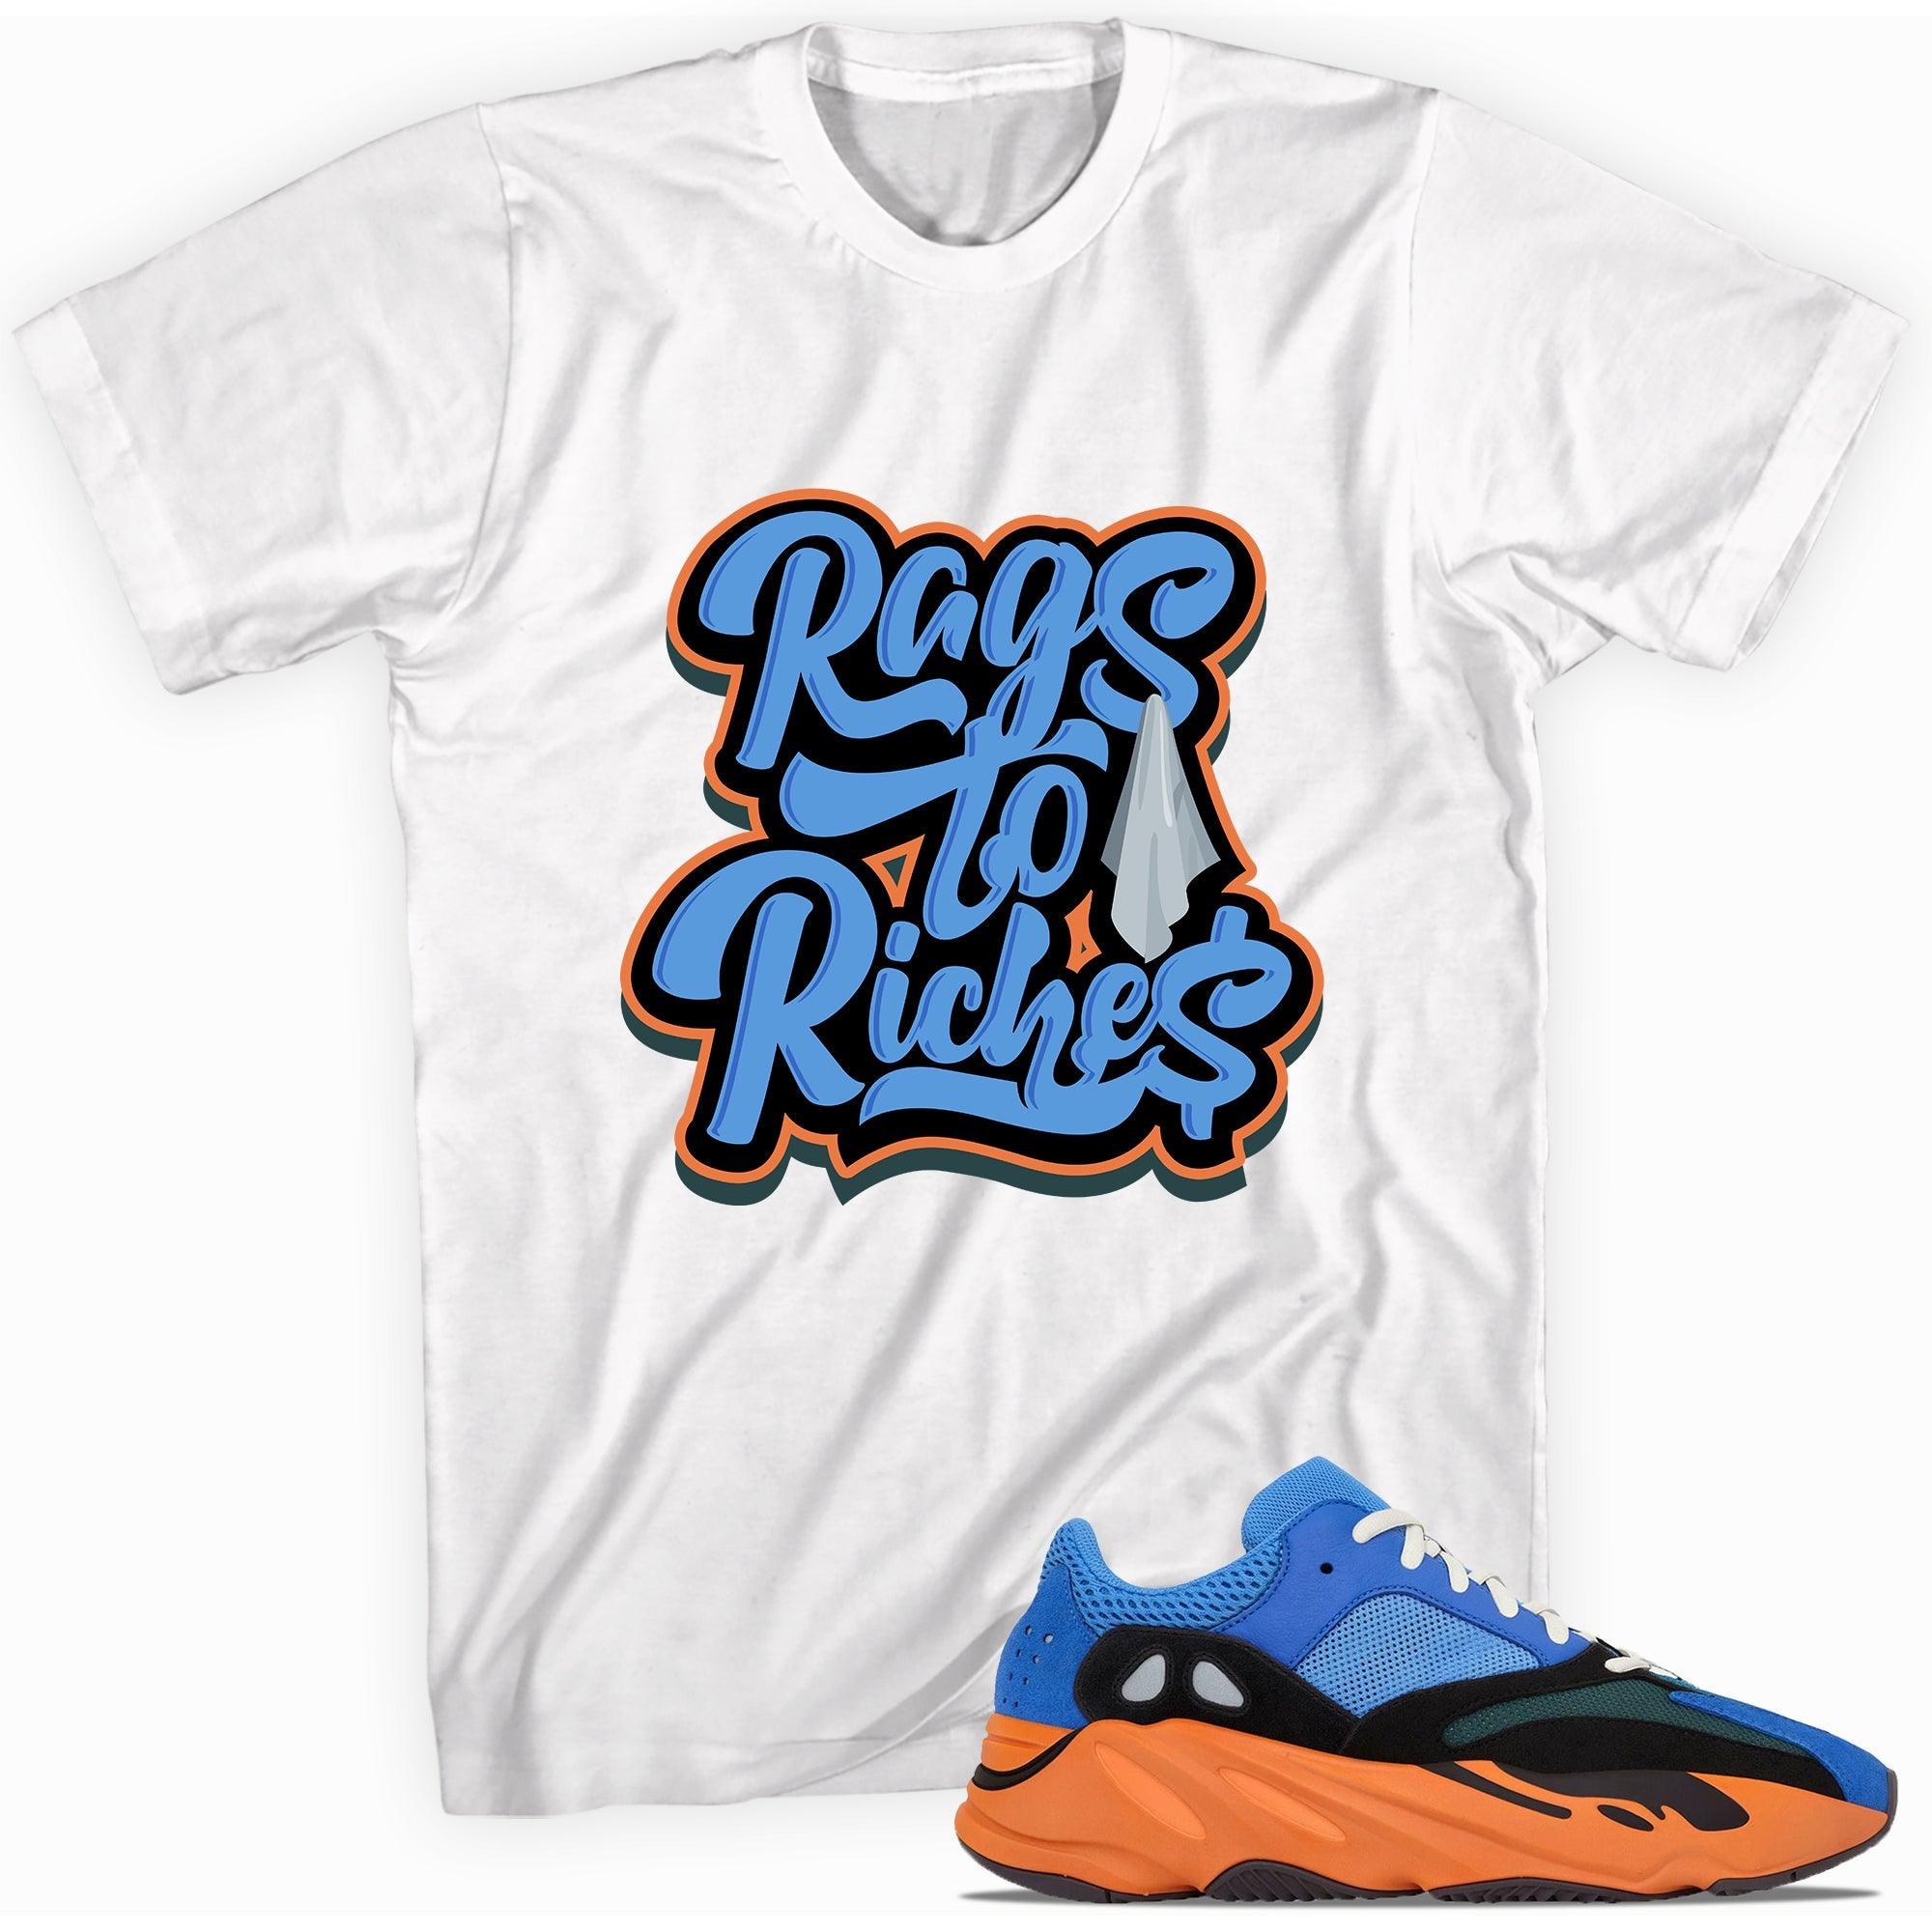 Rags to Riches Shirt Yeezy Boost 700s Bright Blue photo